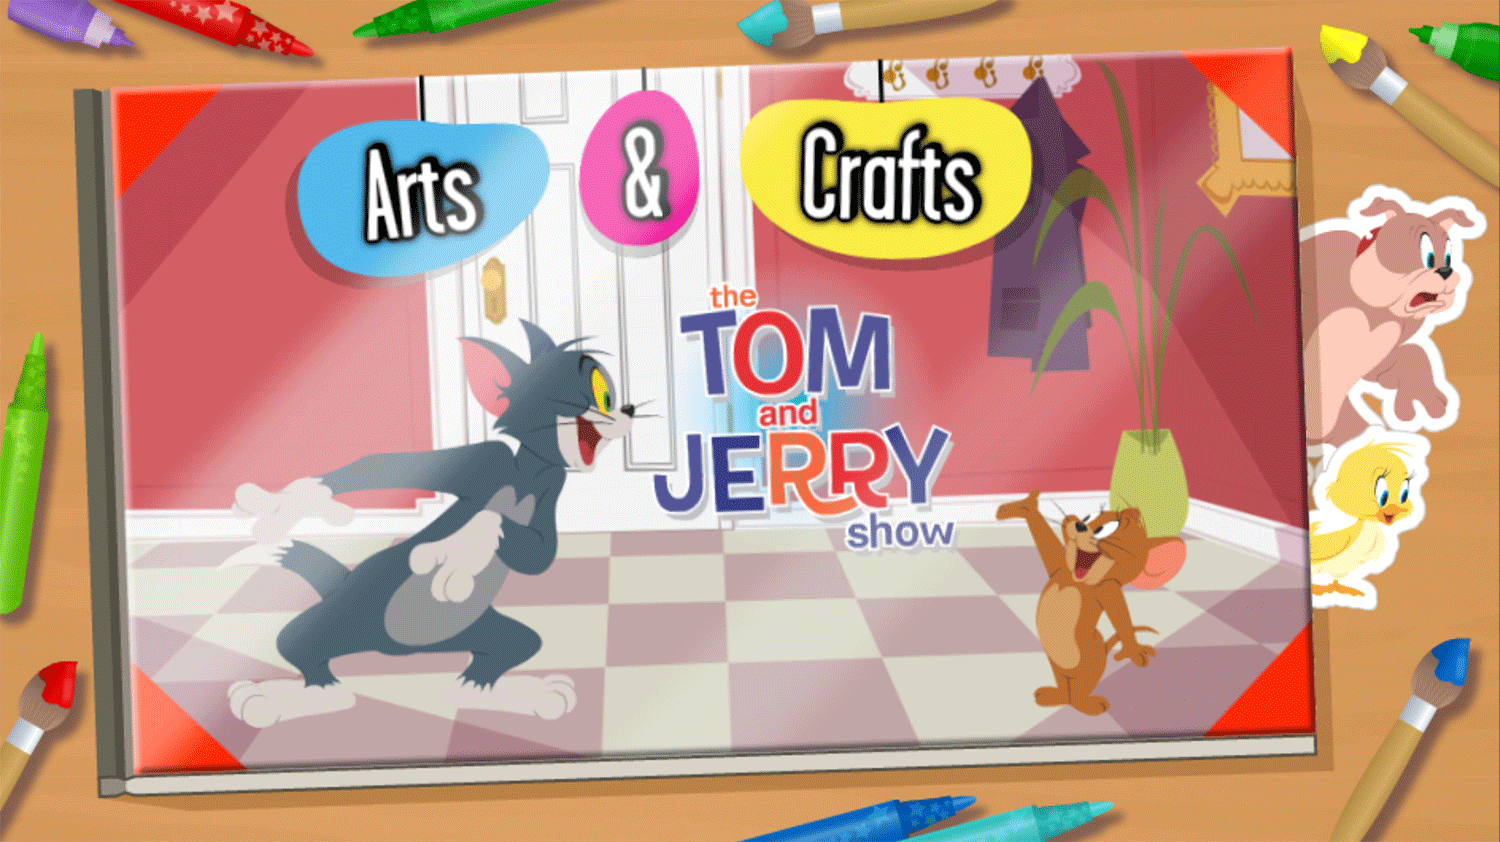 Tom and Jerry Arts and Crafts Welcome Screen Screenshots.